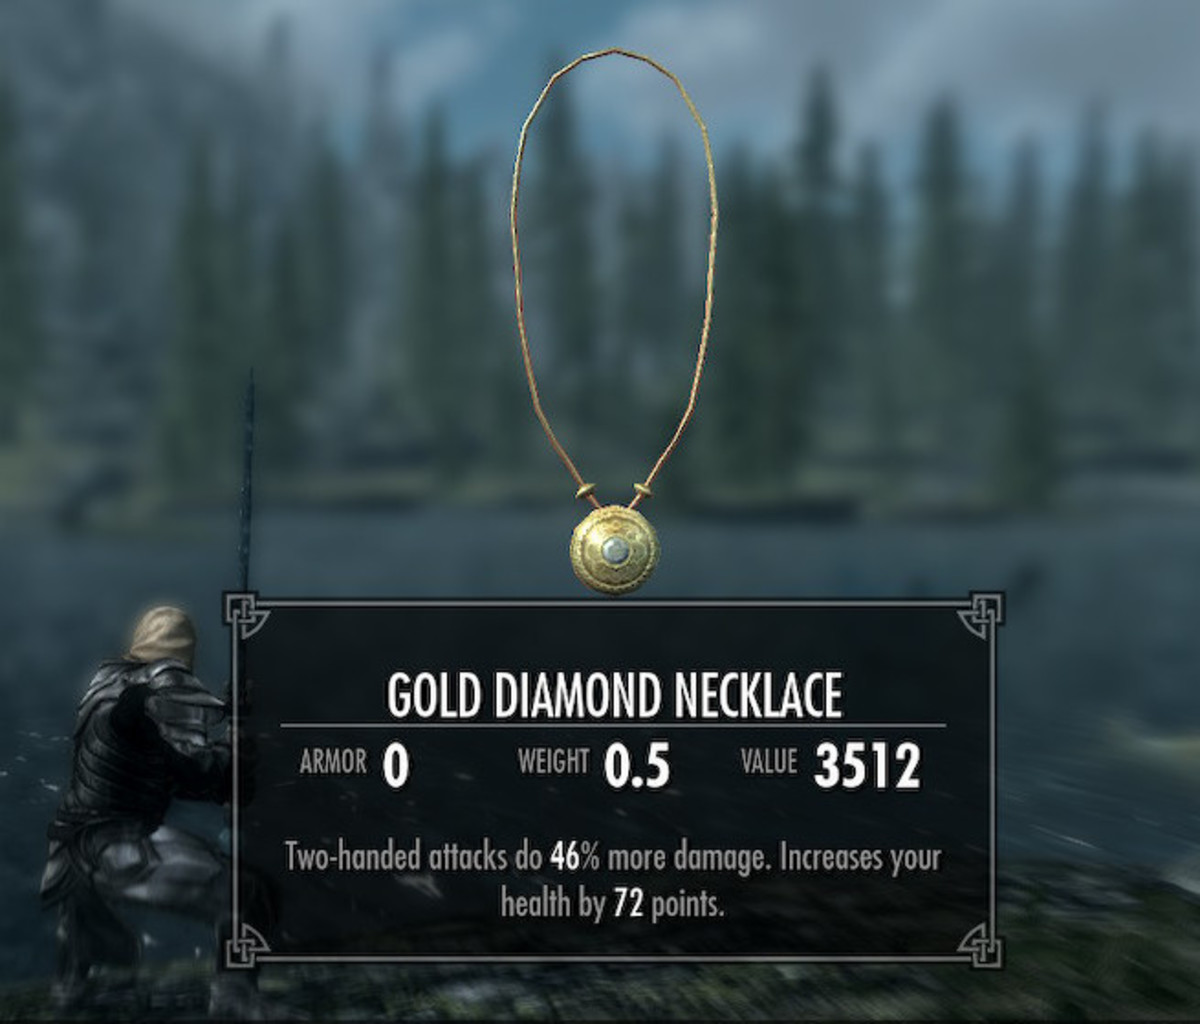 This necklace can boost damage and health.